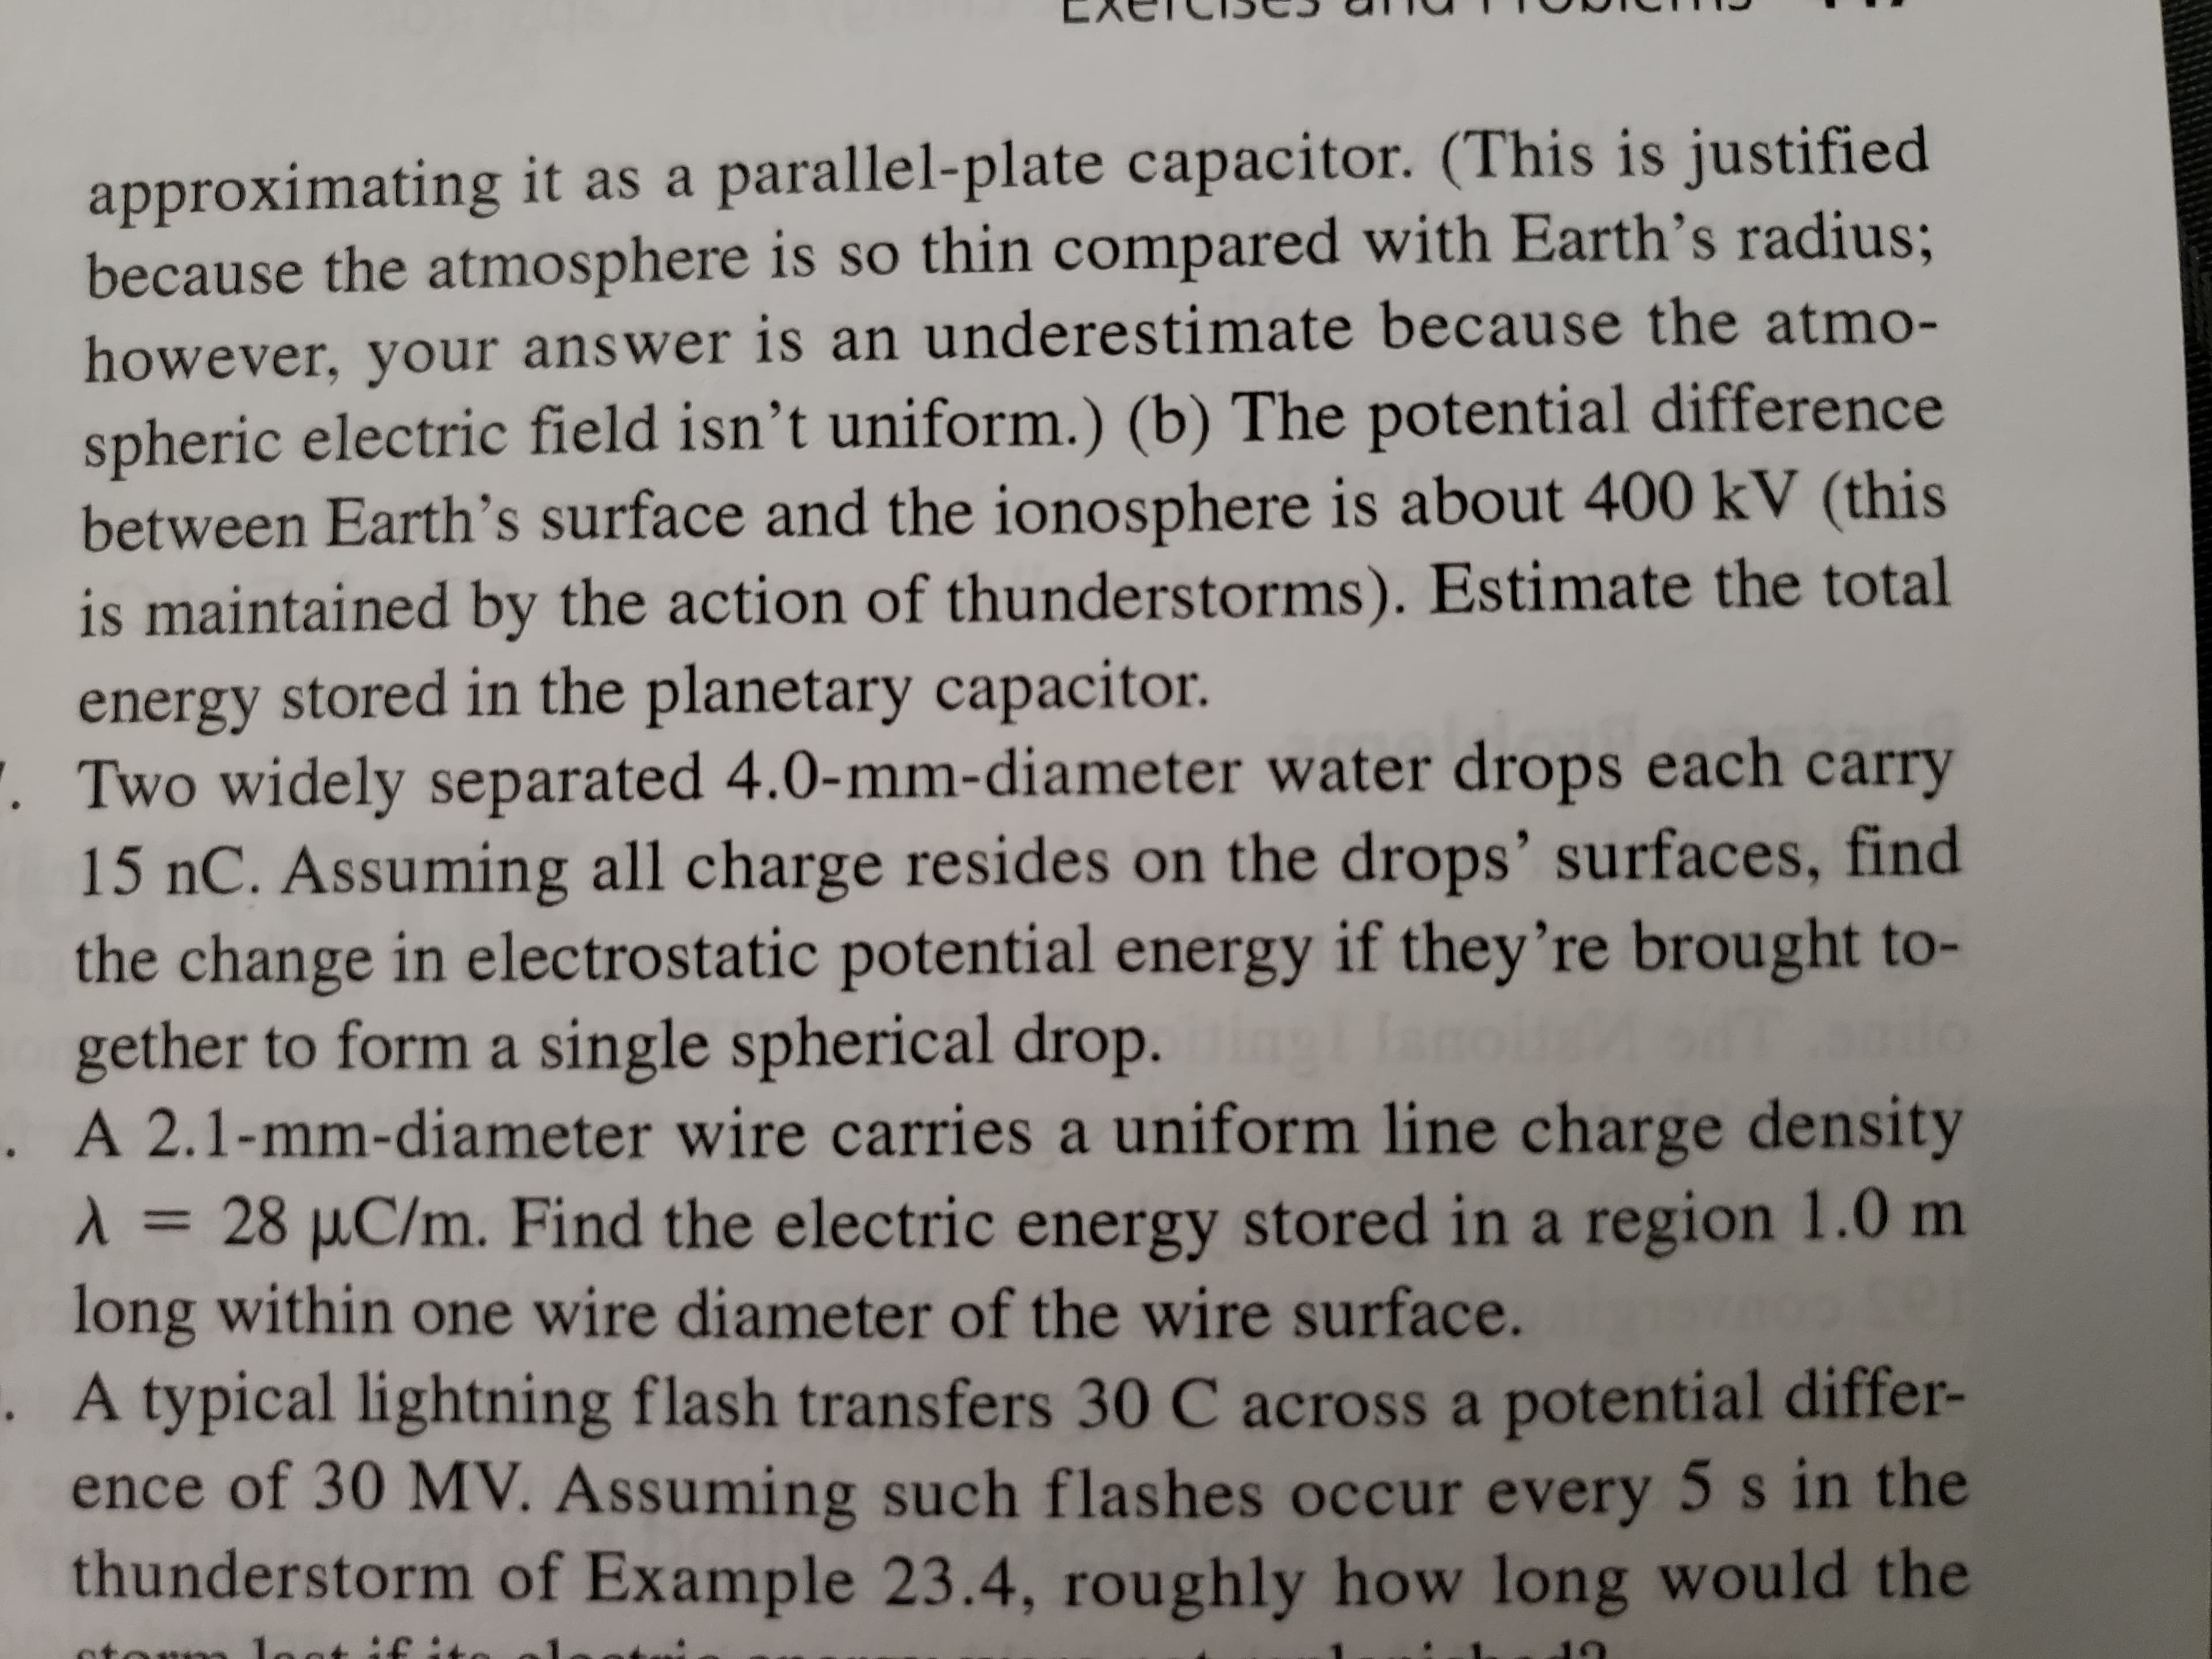 approximating it as a parallel-plate capacitor. (This is justified
because the atmosphere is so thin compared with Earth's radius;
however, your answer is an underestimate because the atmo-
spheric electric field isn't uniform.) (b) The potential difference
between Earth's surface and the ionosphere is about 400 kV (this
is maintained by the action of thunderstorms). Estimate the total
energy stored in the planetary capacitor.
. Two widely separated 4.0-mm-diameter water drops each carry
15 nC. Assuming all charge resides on the drops' surfaces, find
the change in electrostatic potential energy if they're brought to-
gether to form a single spherical drop.in lanoioal
. A 2.1-mm-diameter wire carries a uniform line charge density
1 = 28 µC/m. Find the electric energy stored in a region 1.0 m
long within one wire diameter of the wire surface.
. A typical lightning flash transfers 30 C across a potential differ-
ence of 30 MV. Assuming such flashes occur every 5 s in the
thunderstorm of Example 23.4, roughly how long would the
%3D
otorm loat if :t
